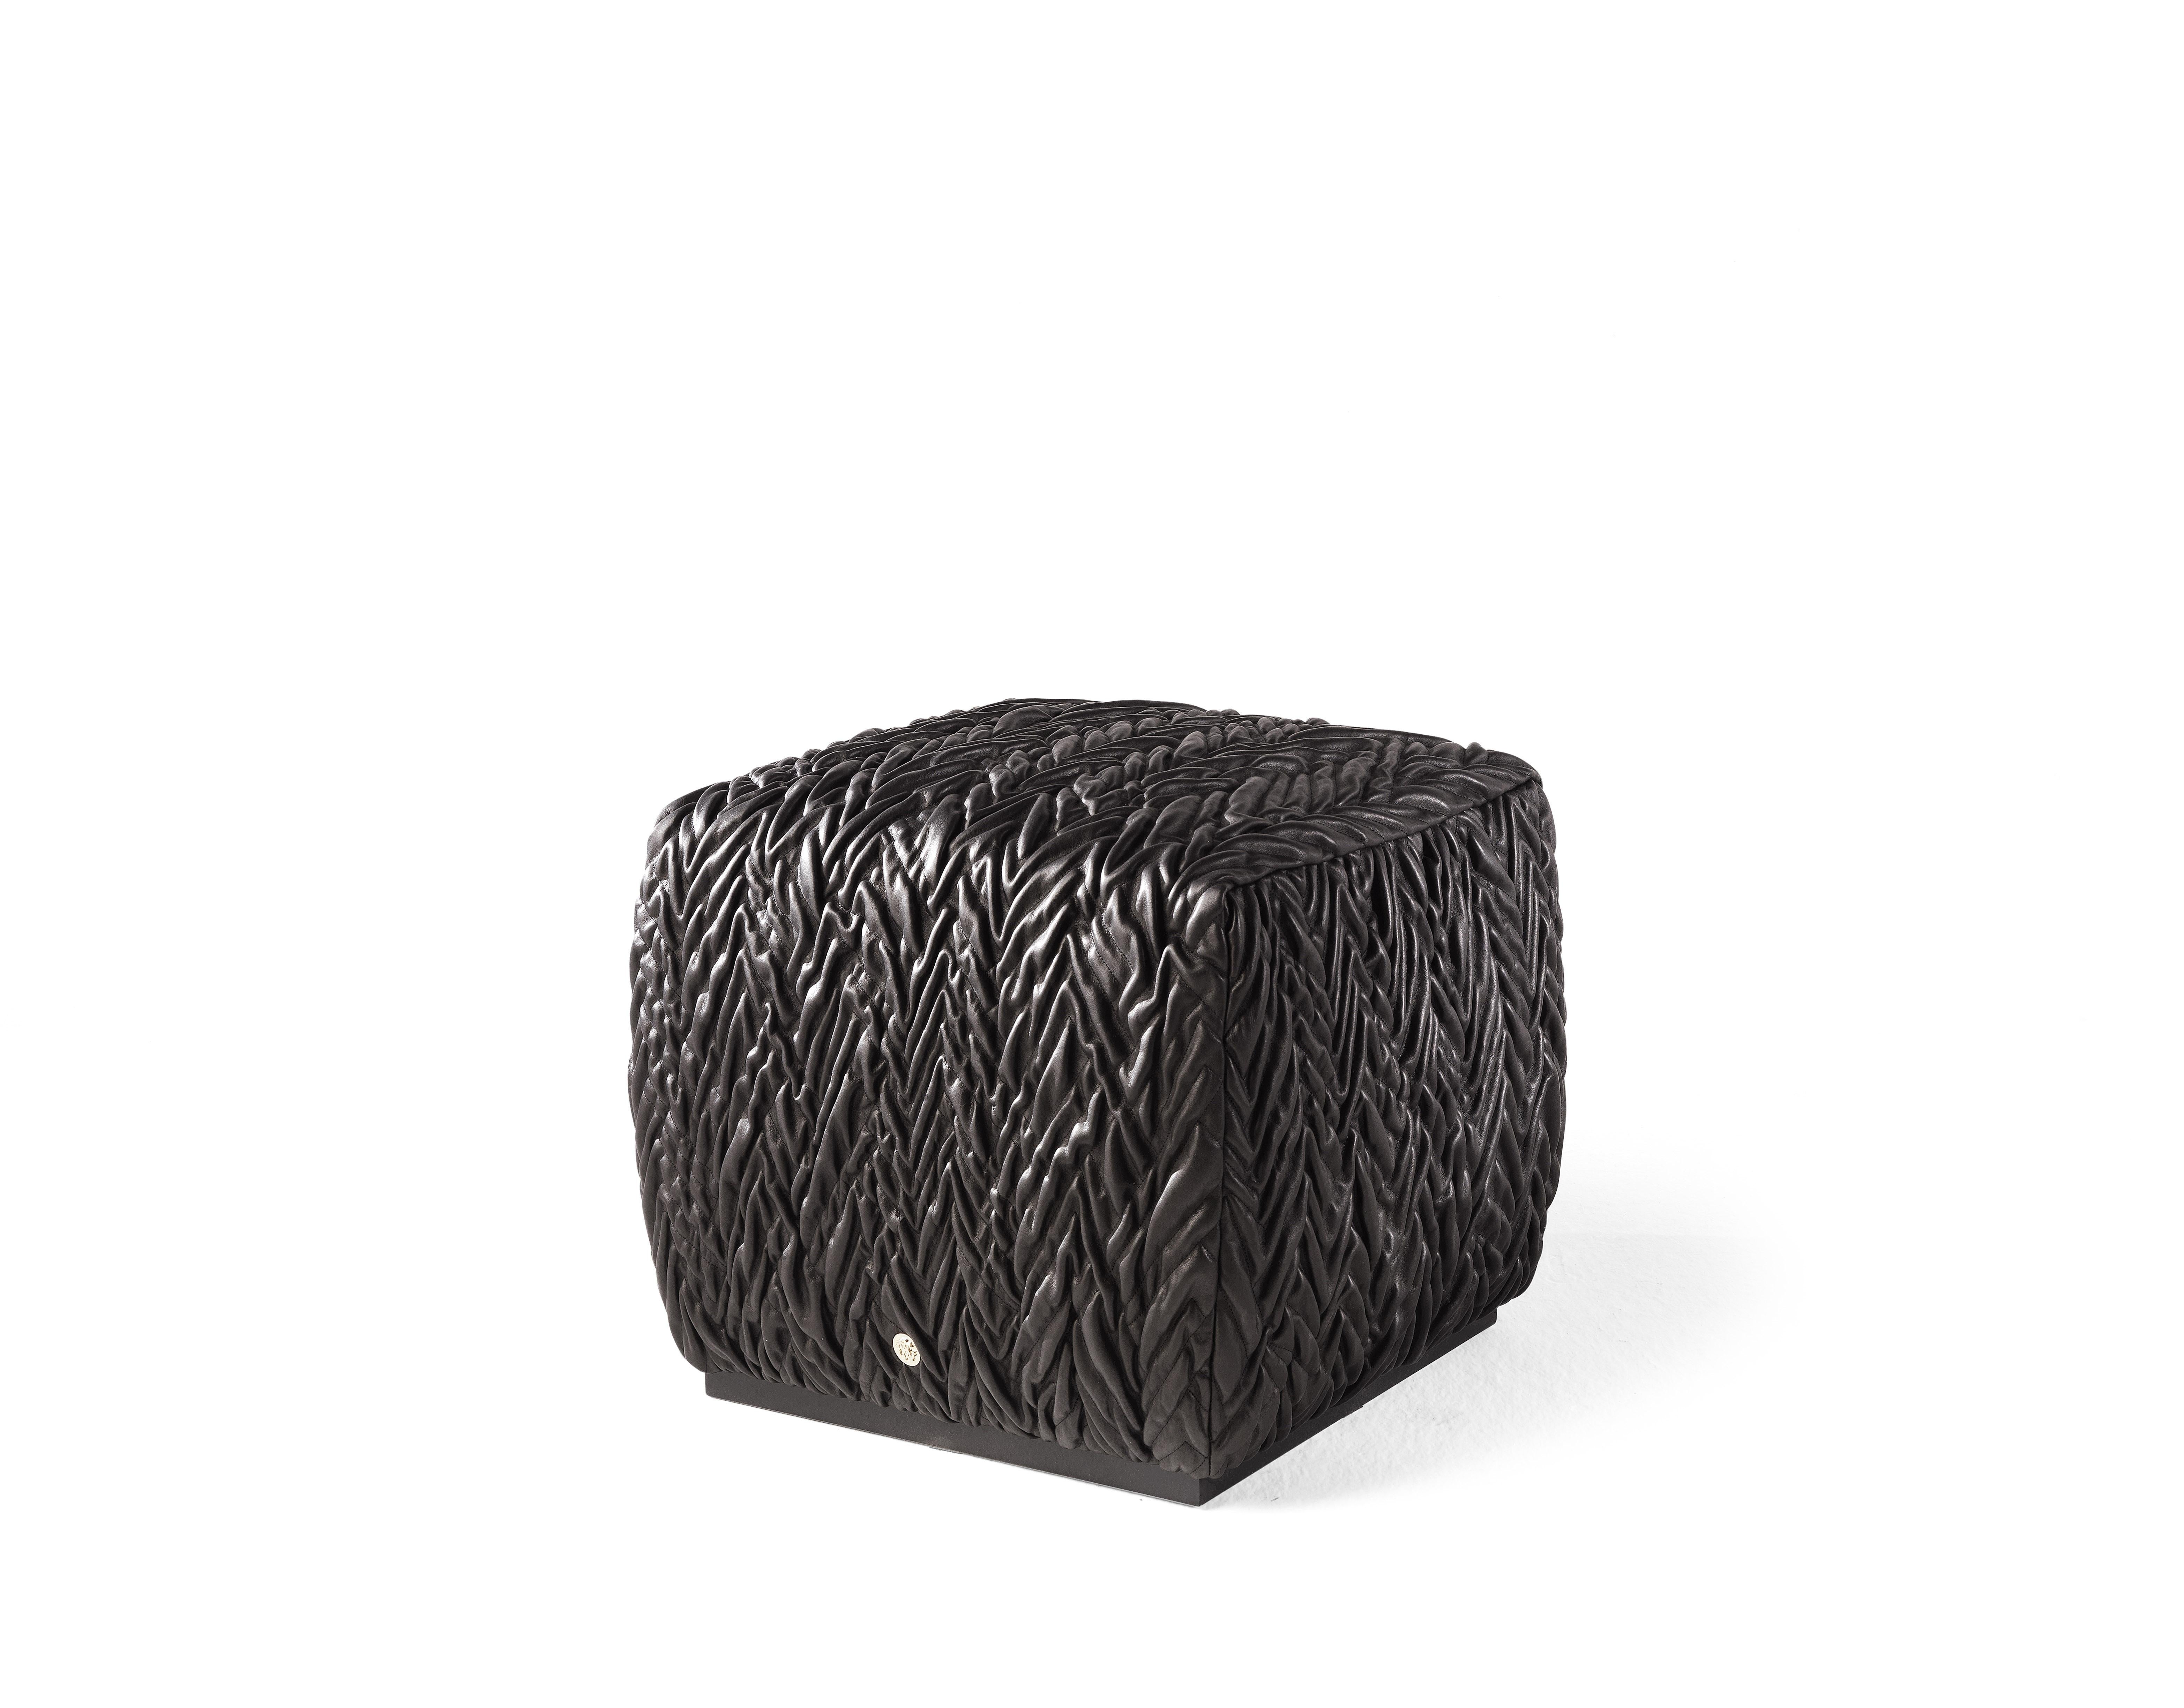 Chic and bold, the Waddi pouf is upholstered in black leather with “Spiga” quilting and refined workmanship that refers to the Cavalli leather goods and demonstrates the sartorial skills of the brand.
Waddi pouf with structure in fir solid wood and